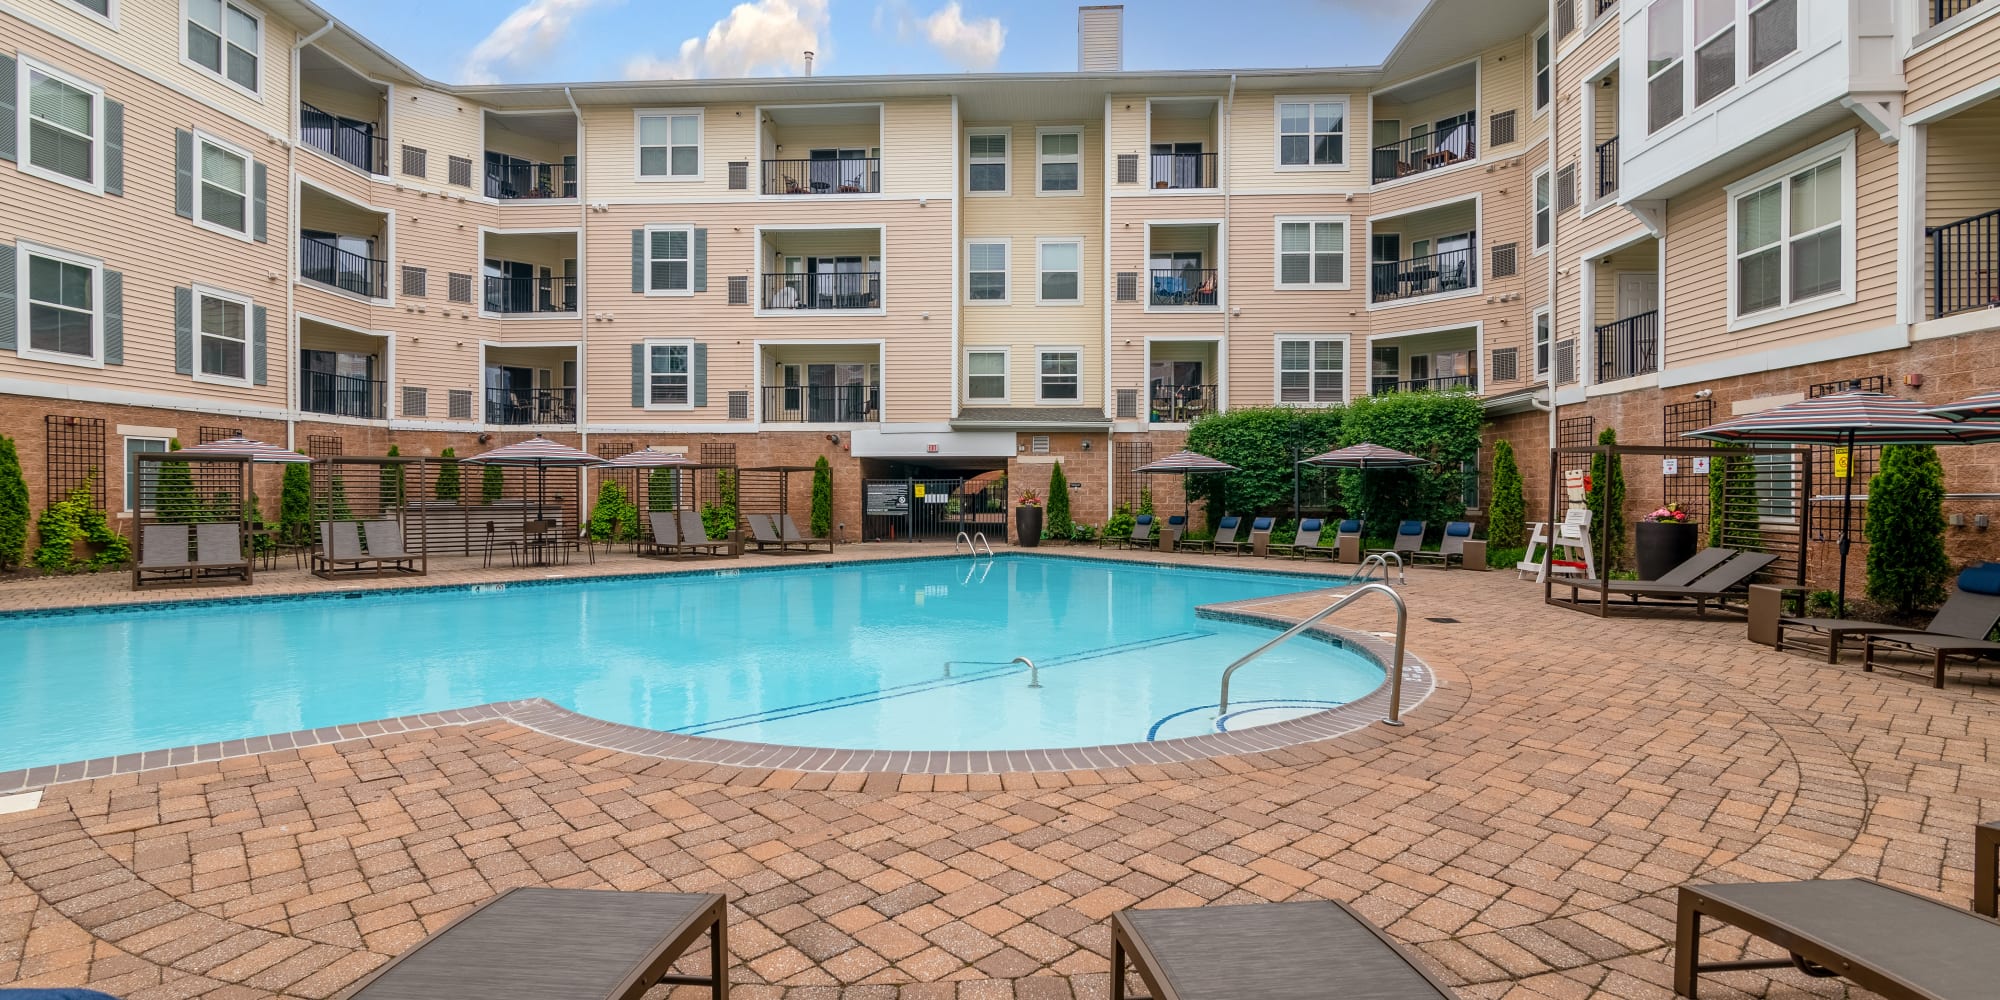 Resort style pool at Sofi Gaslight Commons in South Orange, New Jersey